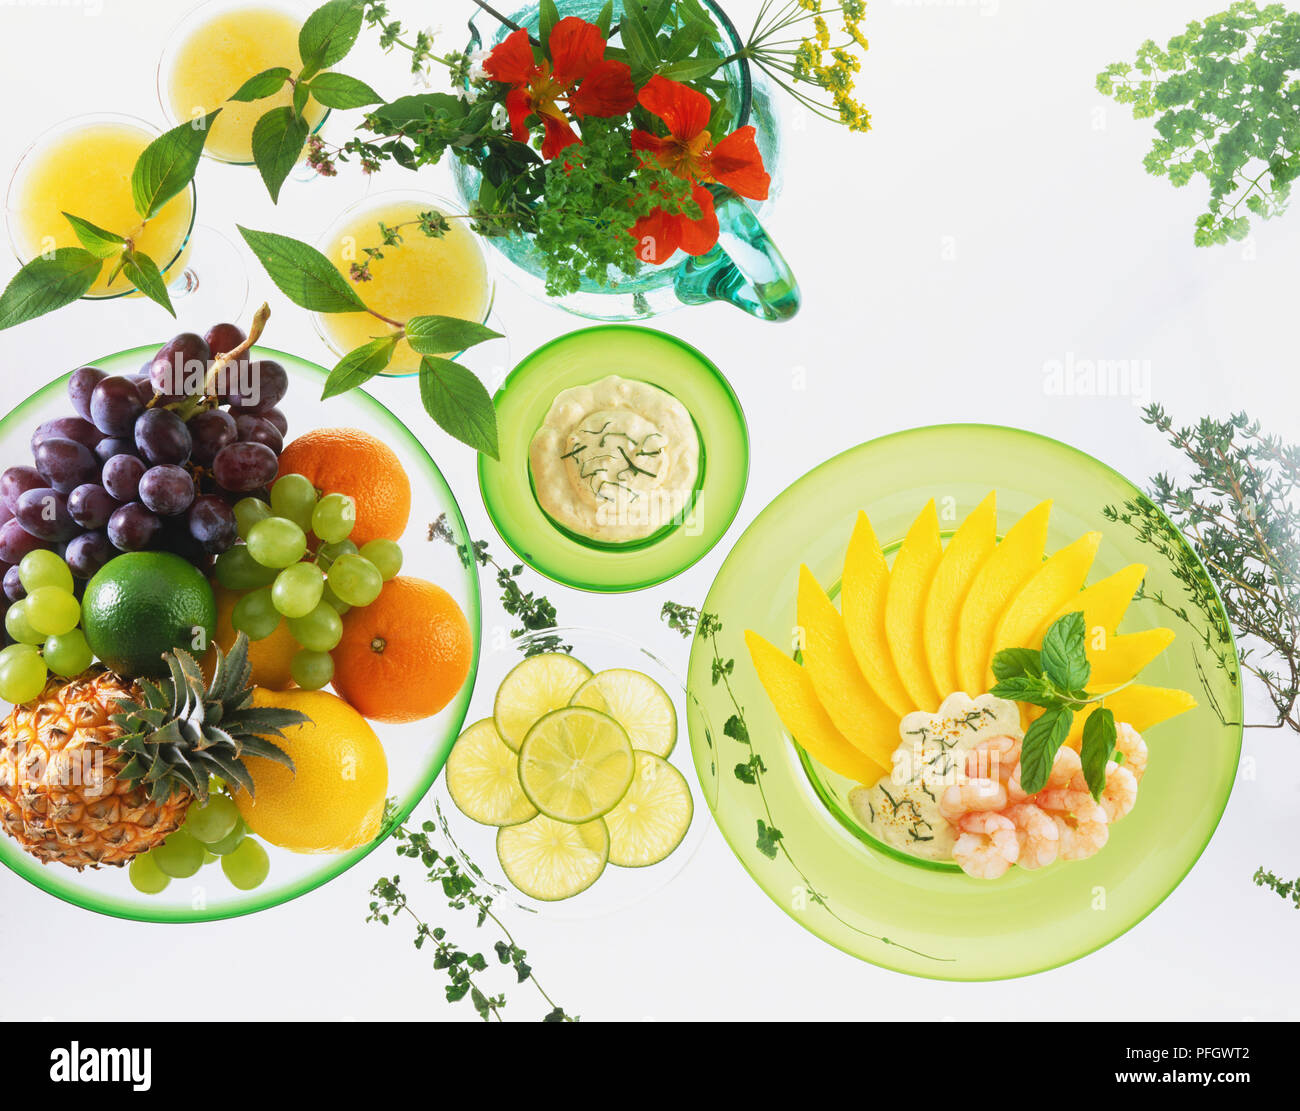 Bowls of fresh fruit, lime slices, herbs and dips, and a dish of sliced mango and peeled prawns Stock Photo